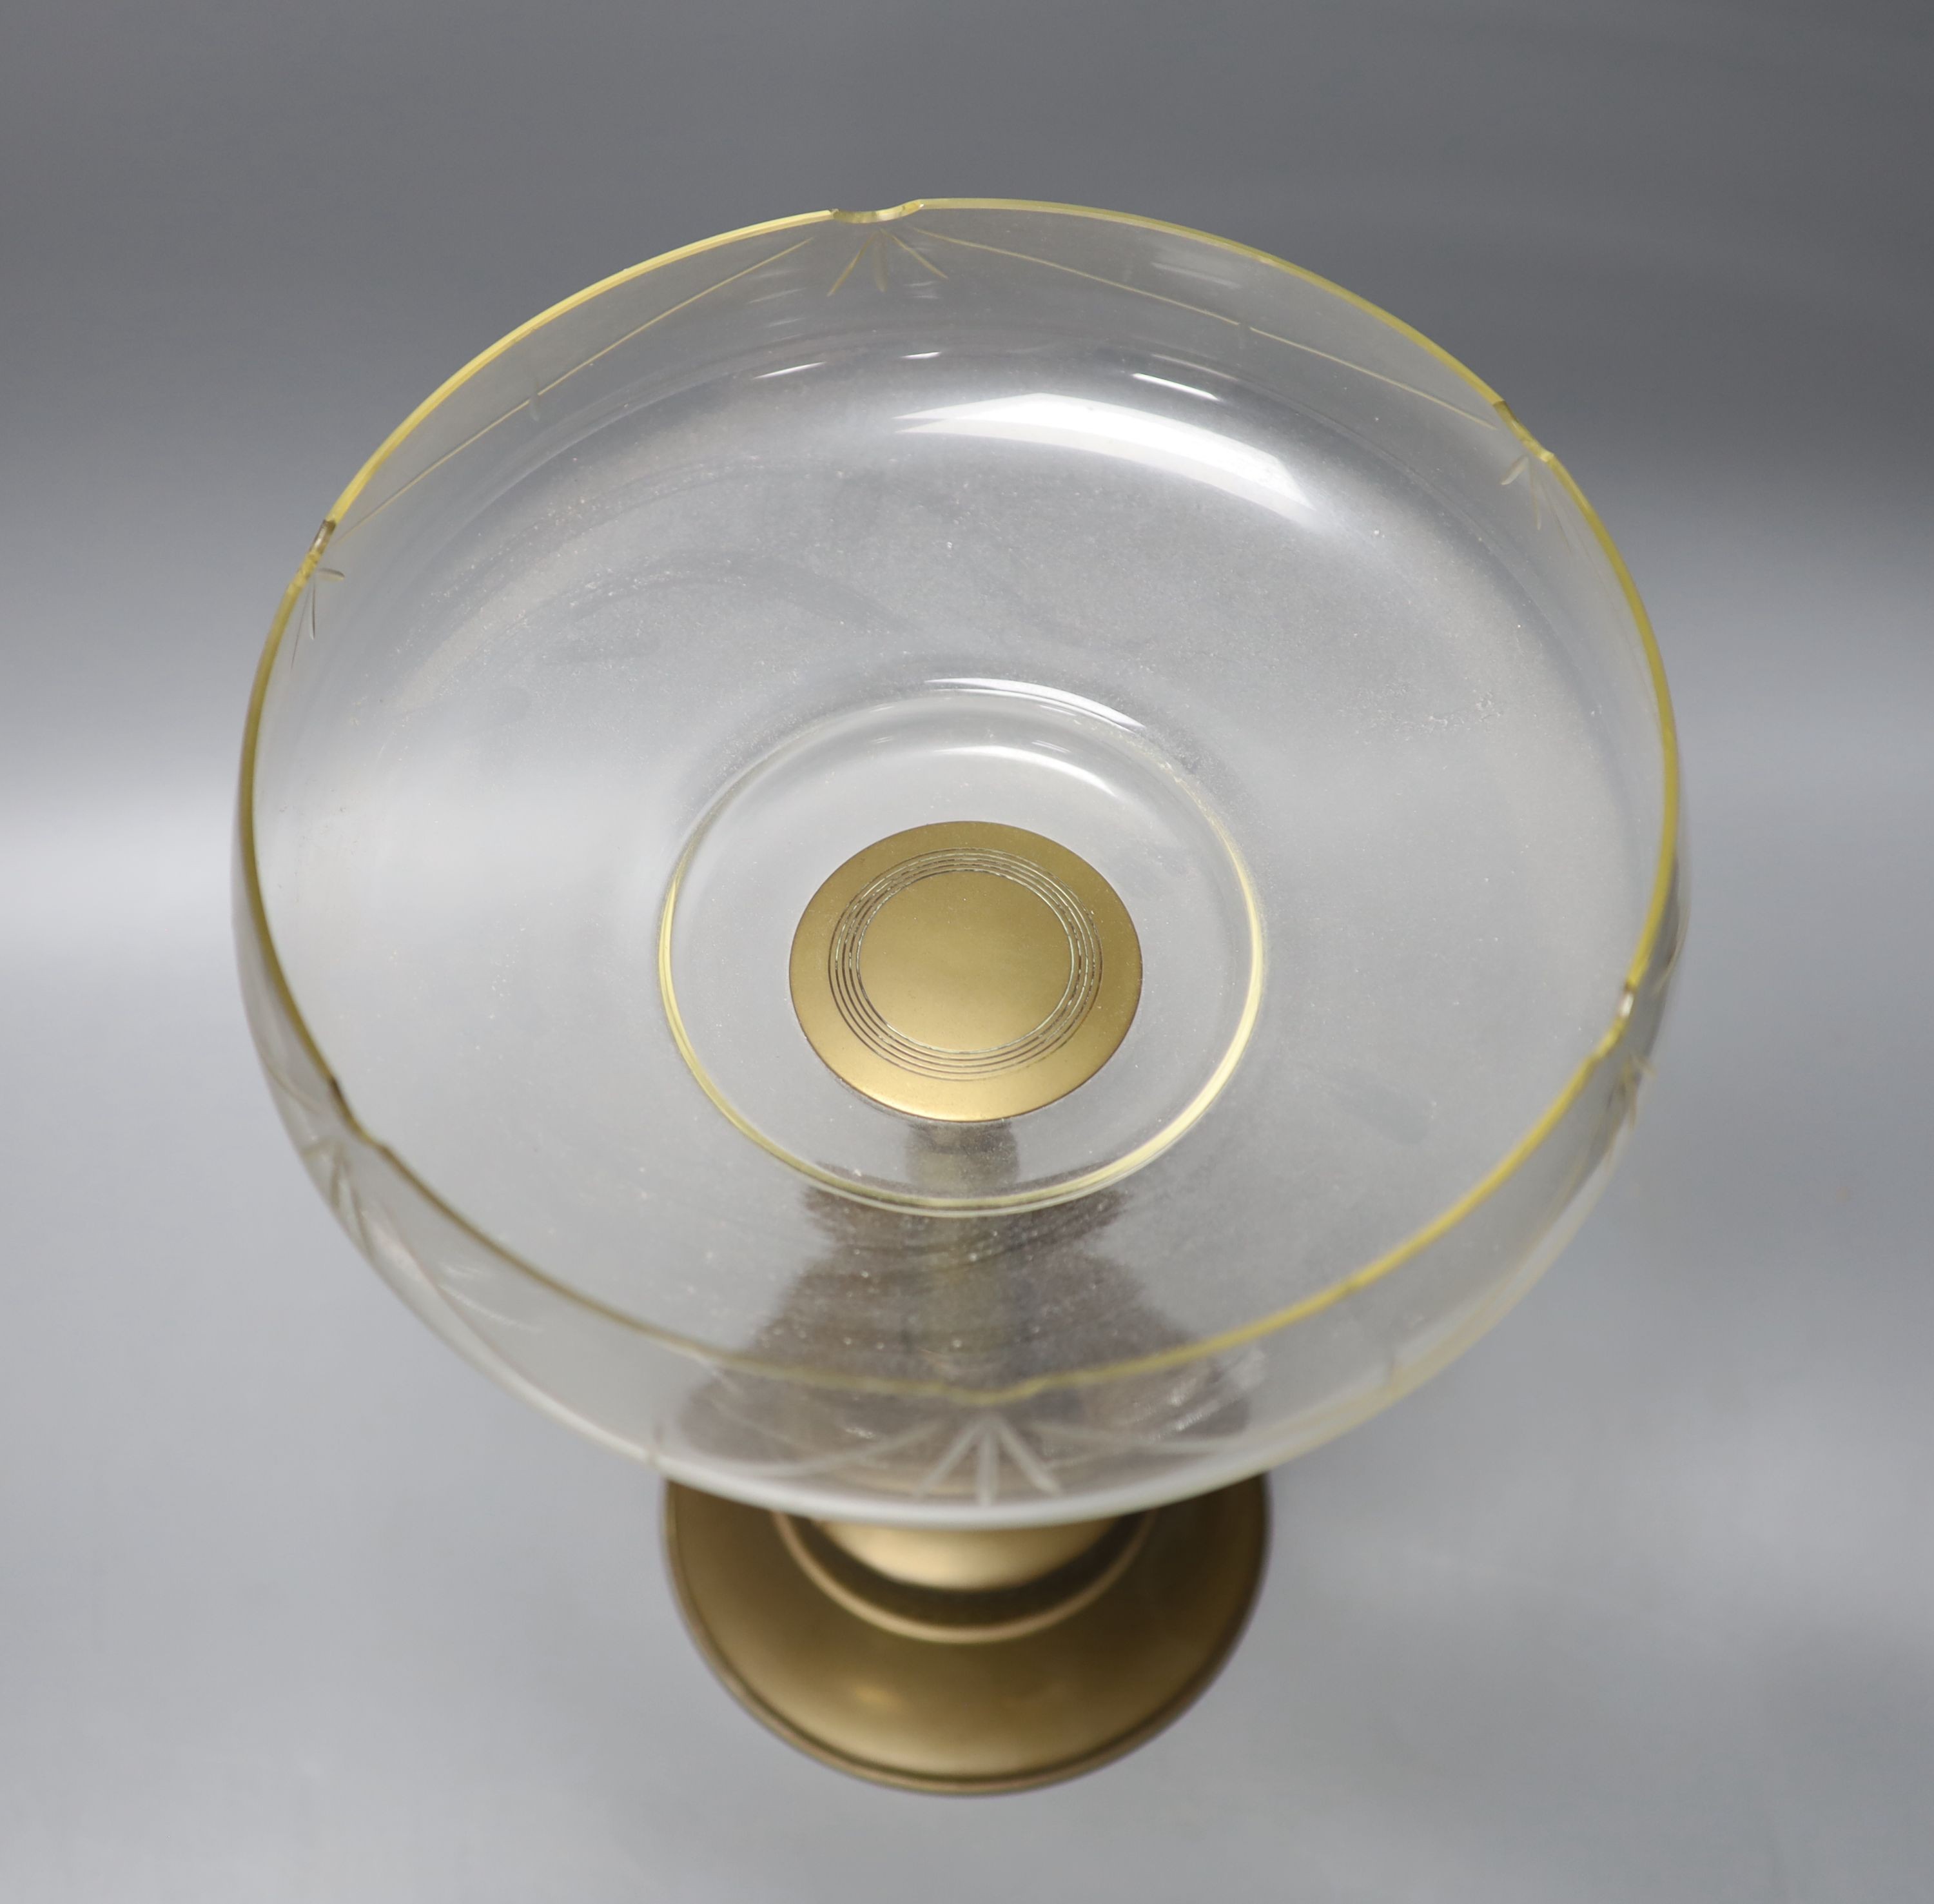 A brass comport with glass bowl, 34. 5 cm high